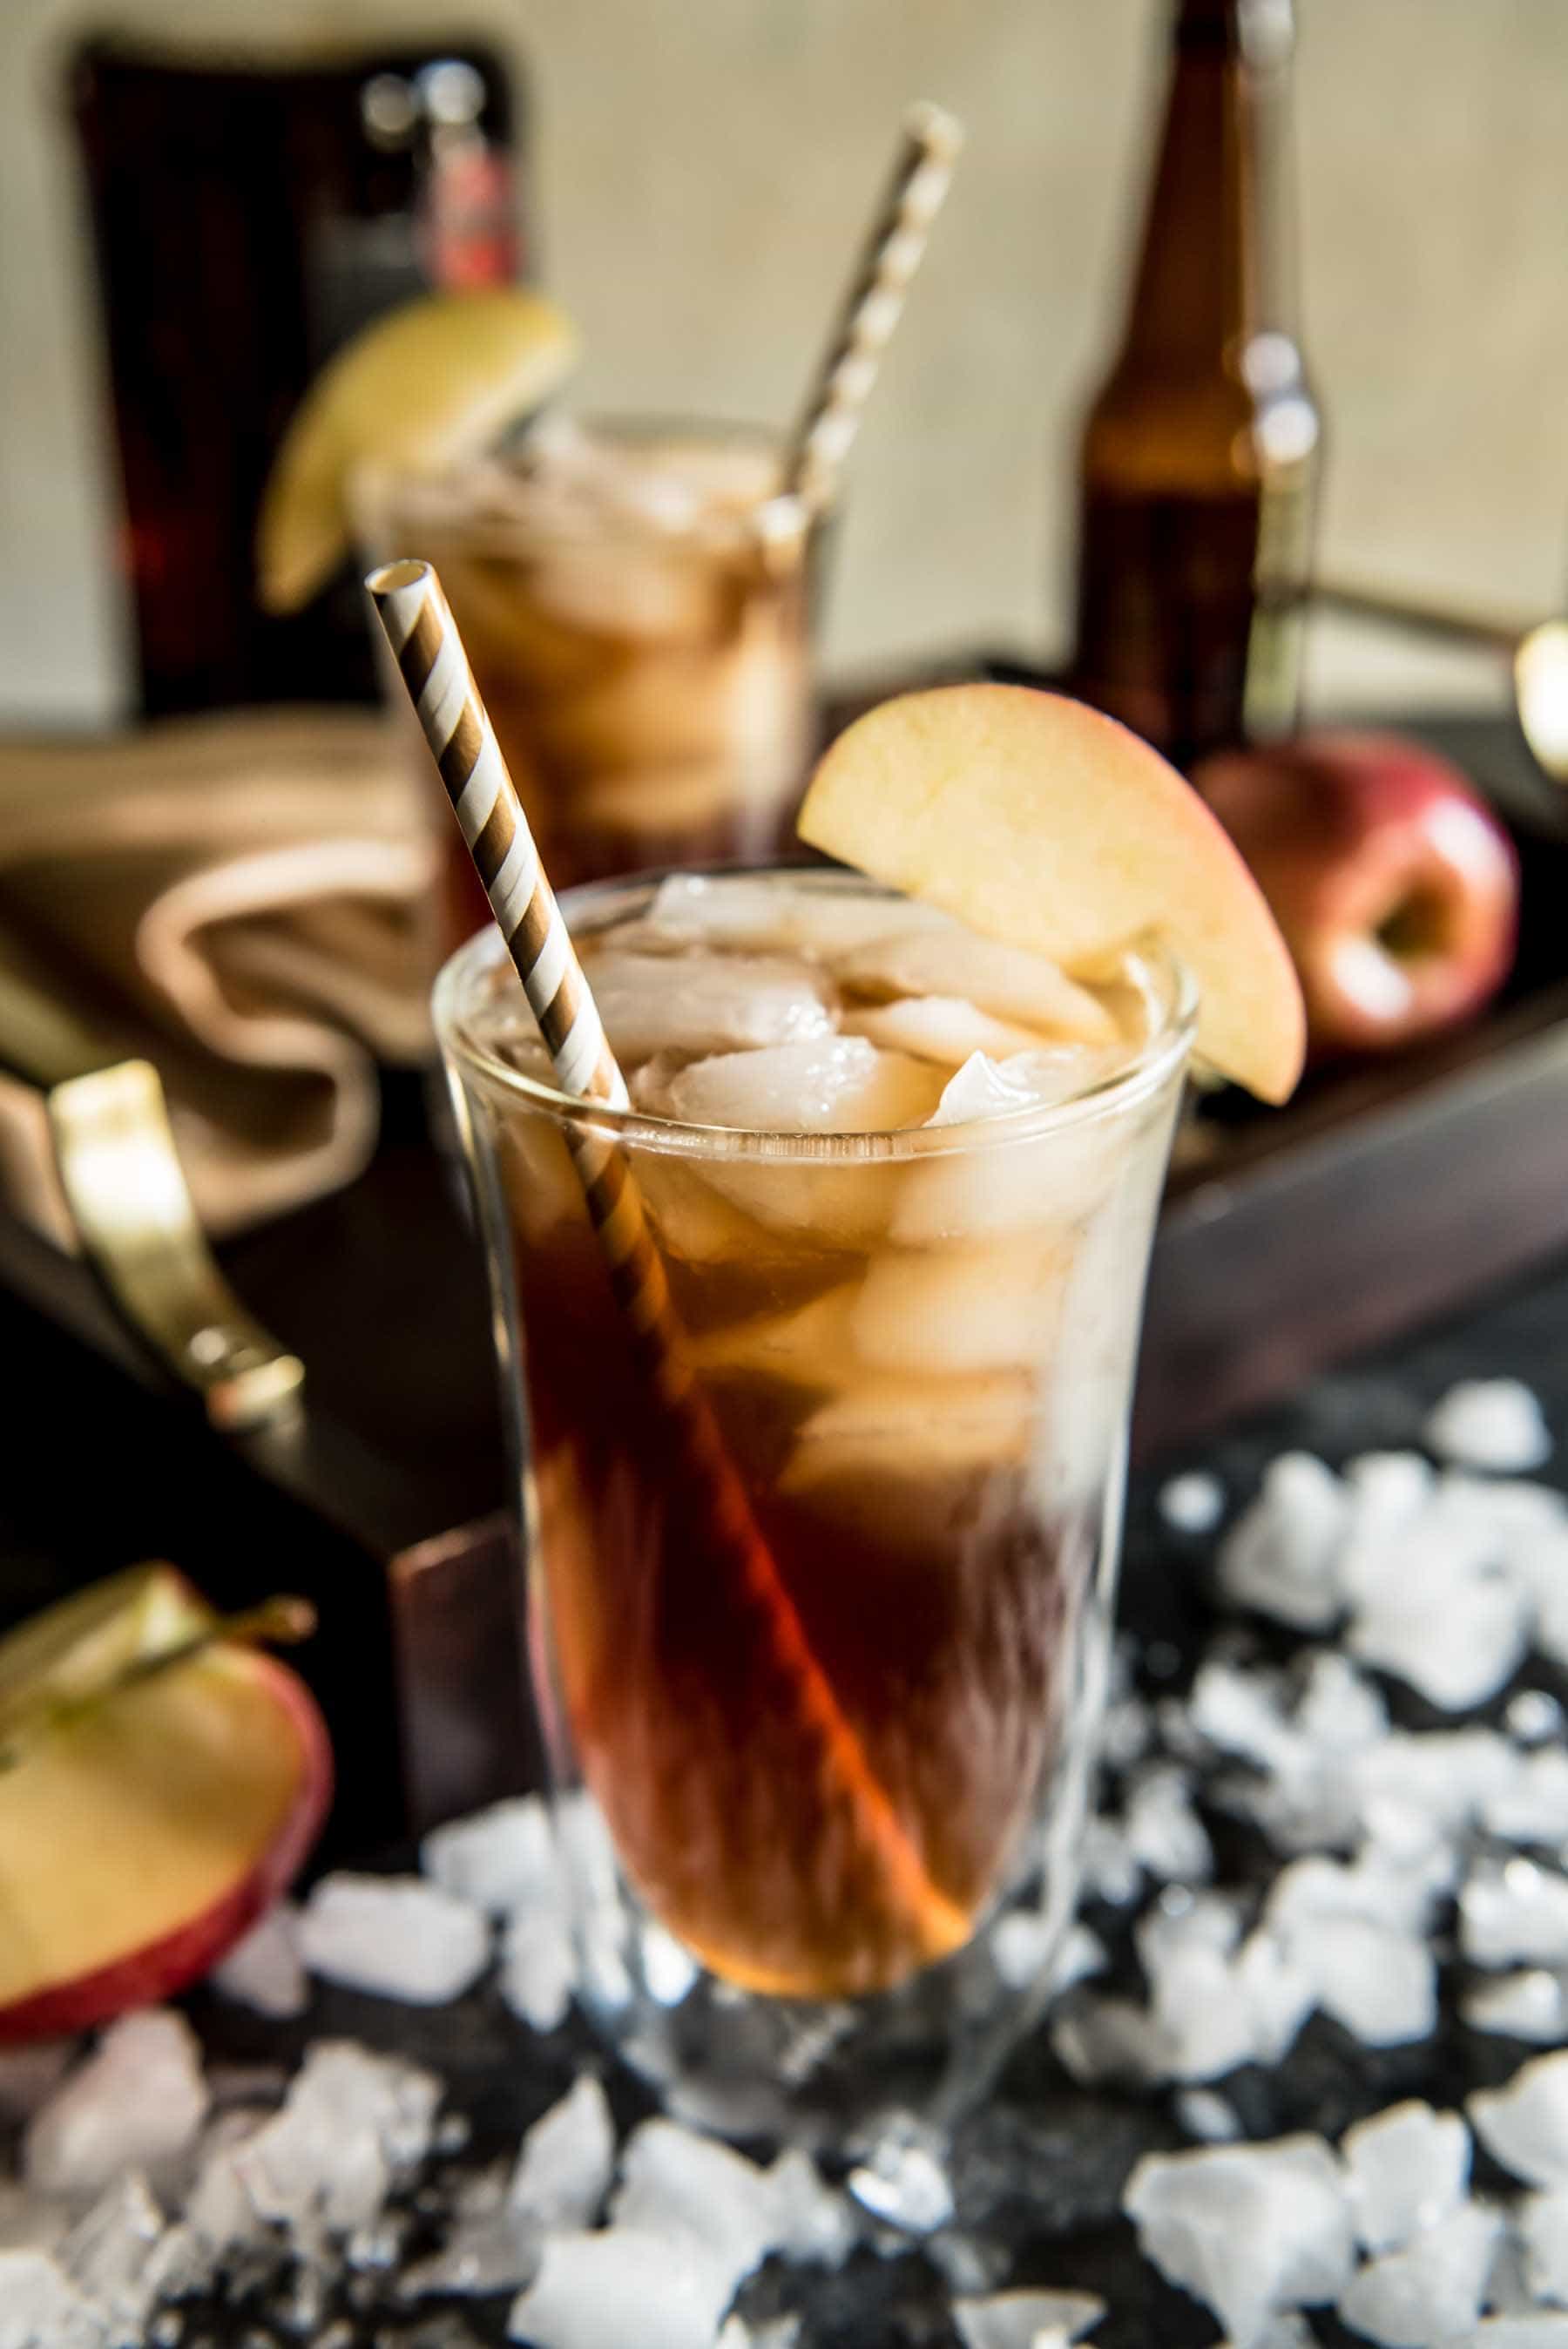 A simple seasonal twist on a popular rum cocktail - this Apple Cider Dark & Stormy replaces the ginger beer with autumn apple goodness.